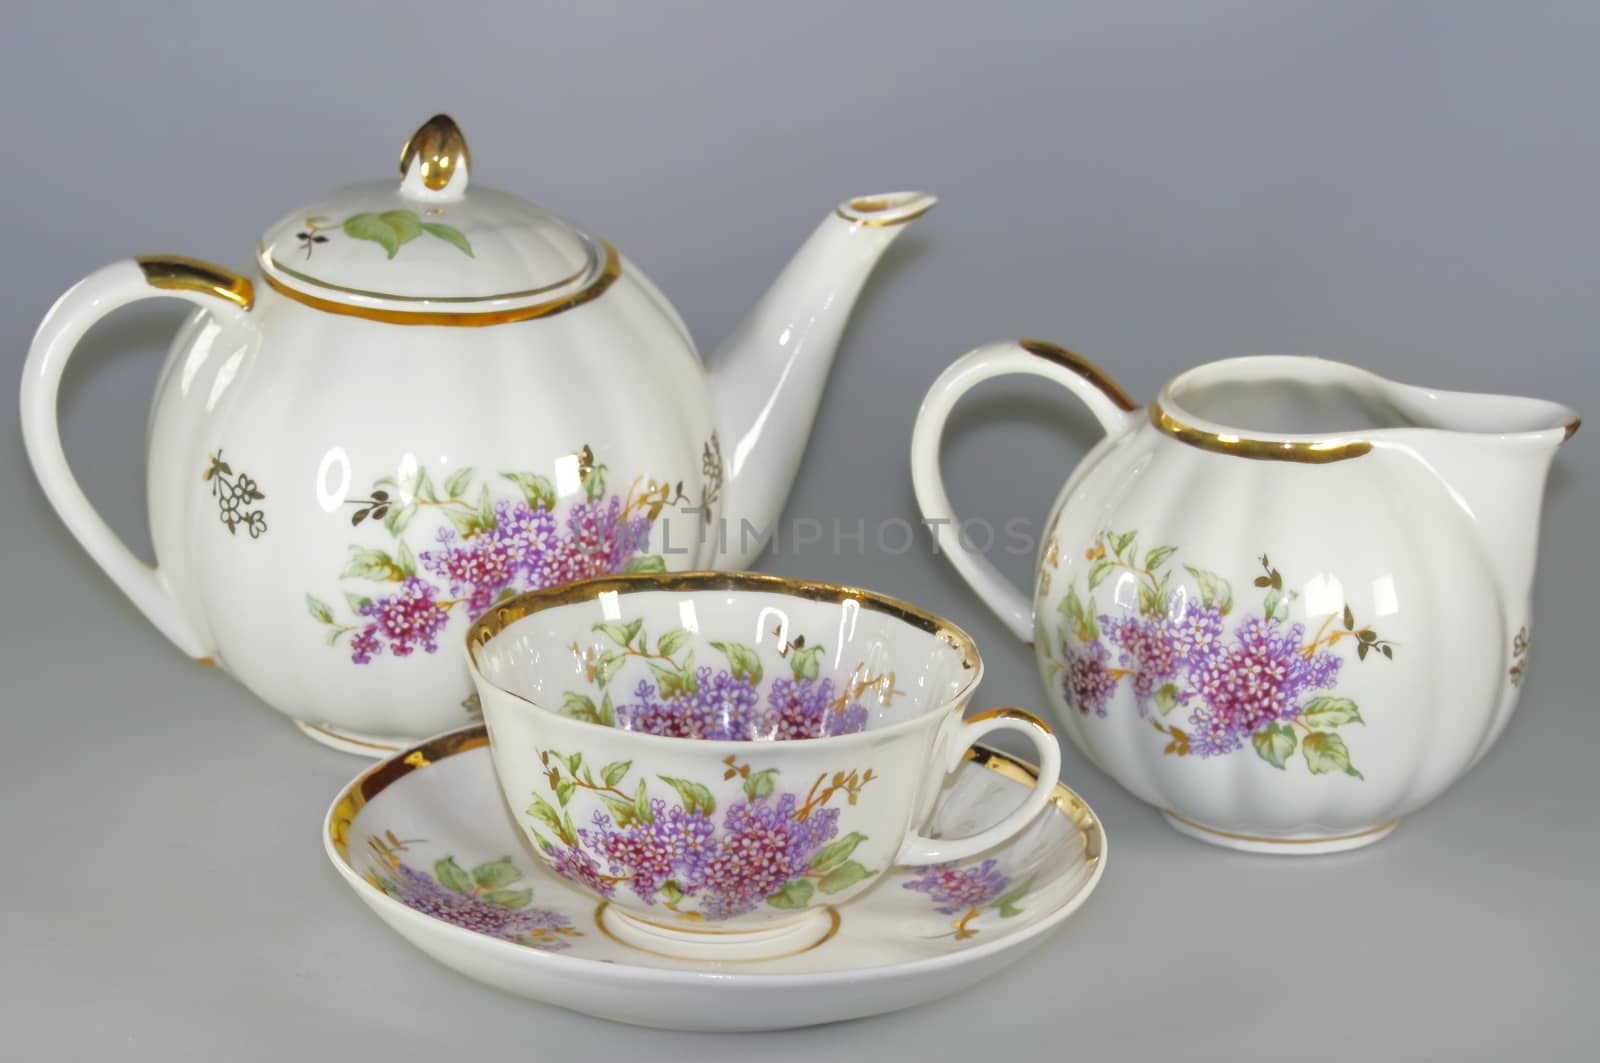 to drink tea and coffee with a beautiful set of tableware